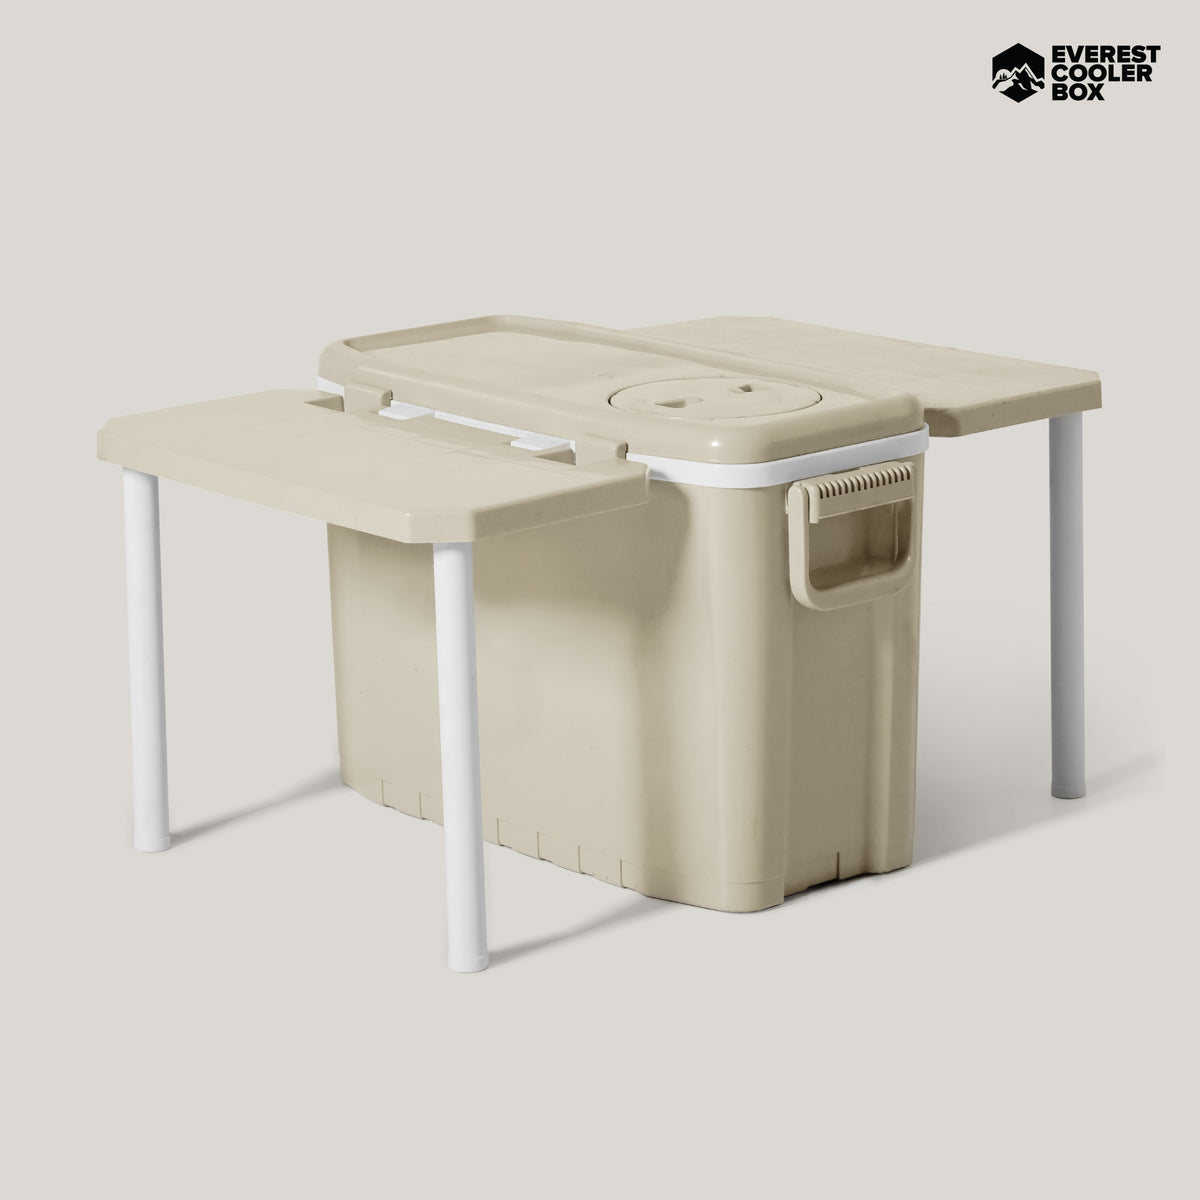 New Arrival Cooler Box 59L with Table AG994T